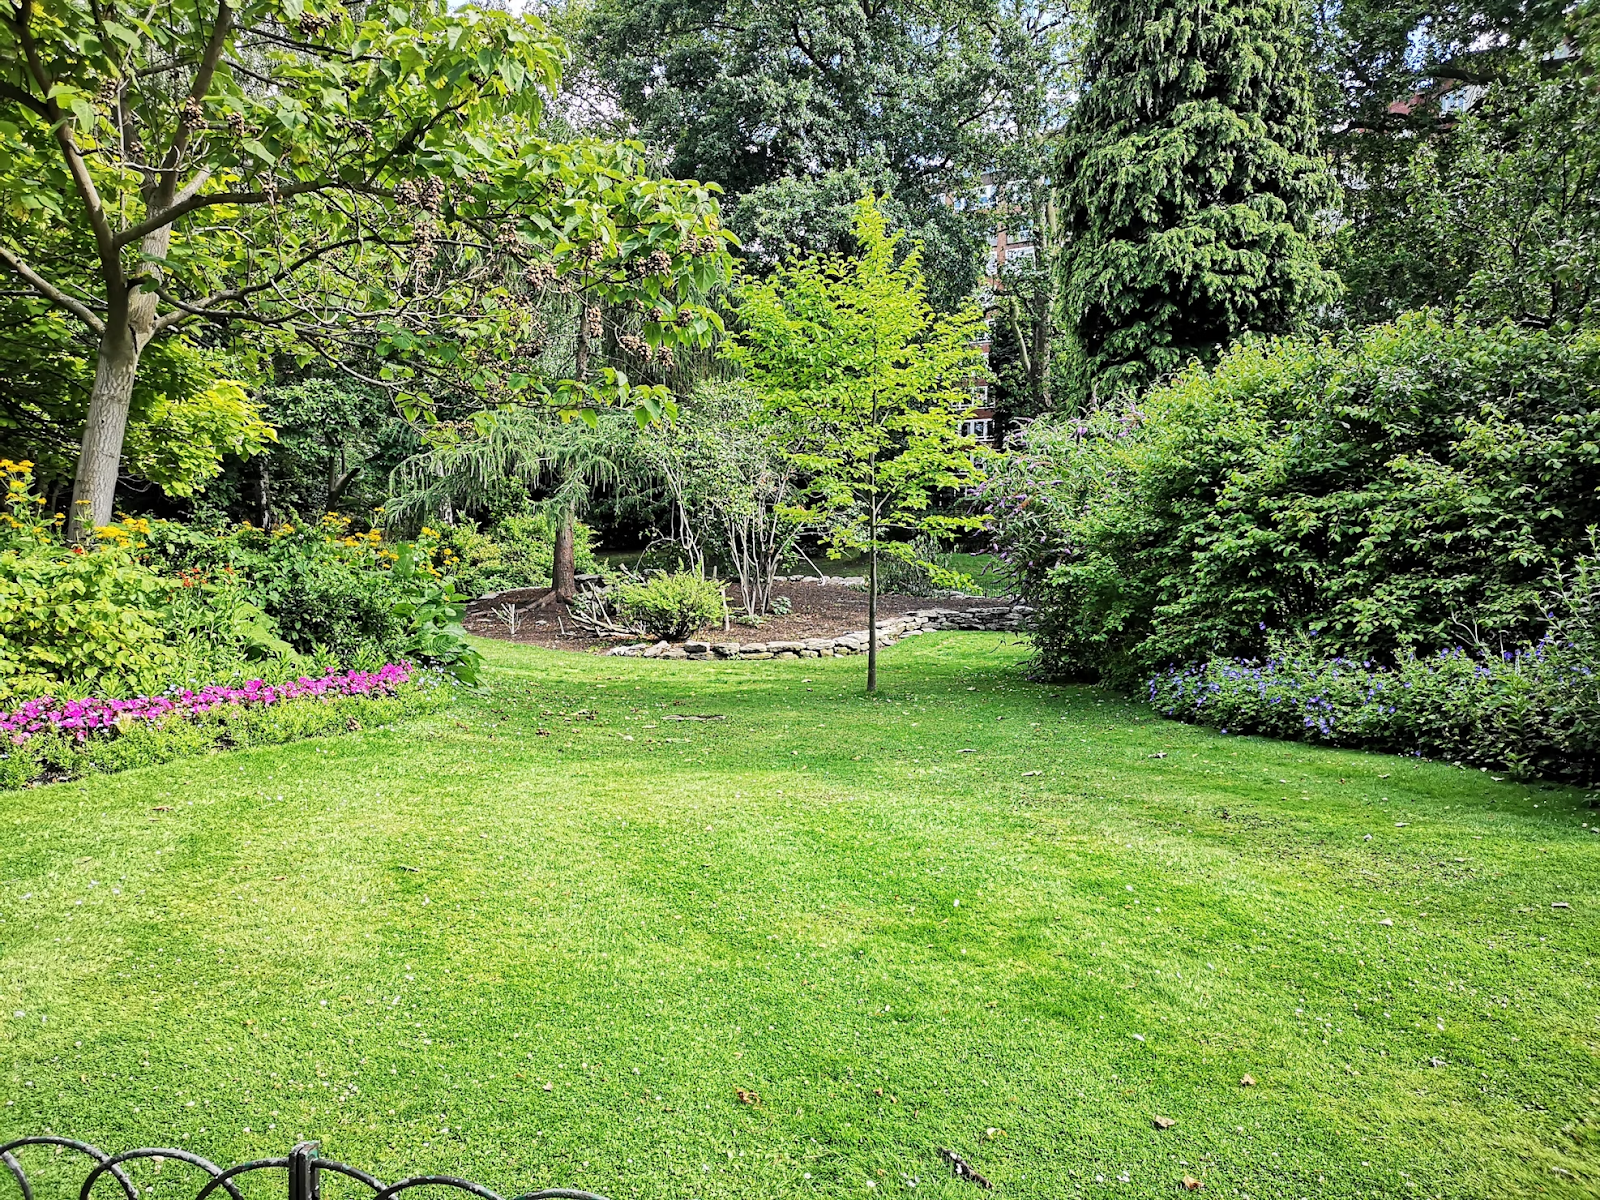 3 Tips to Increase Your Lawn’s Aesthetics